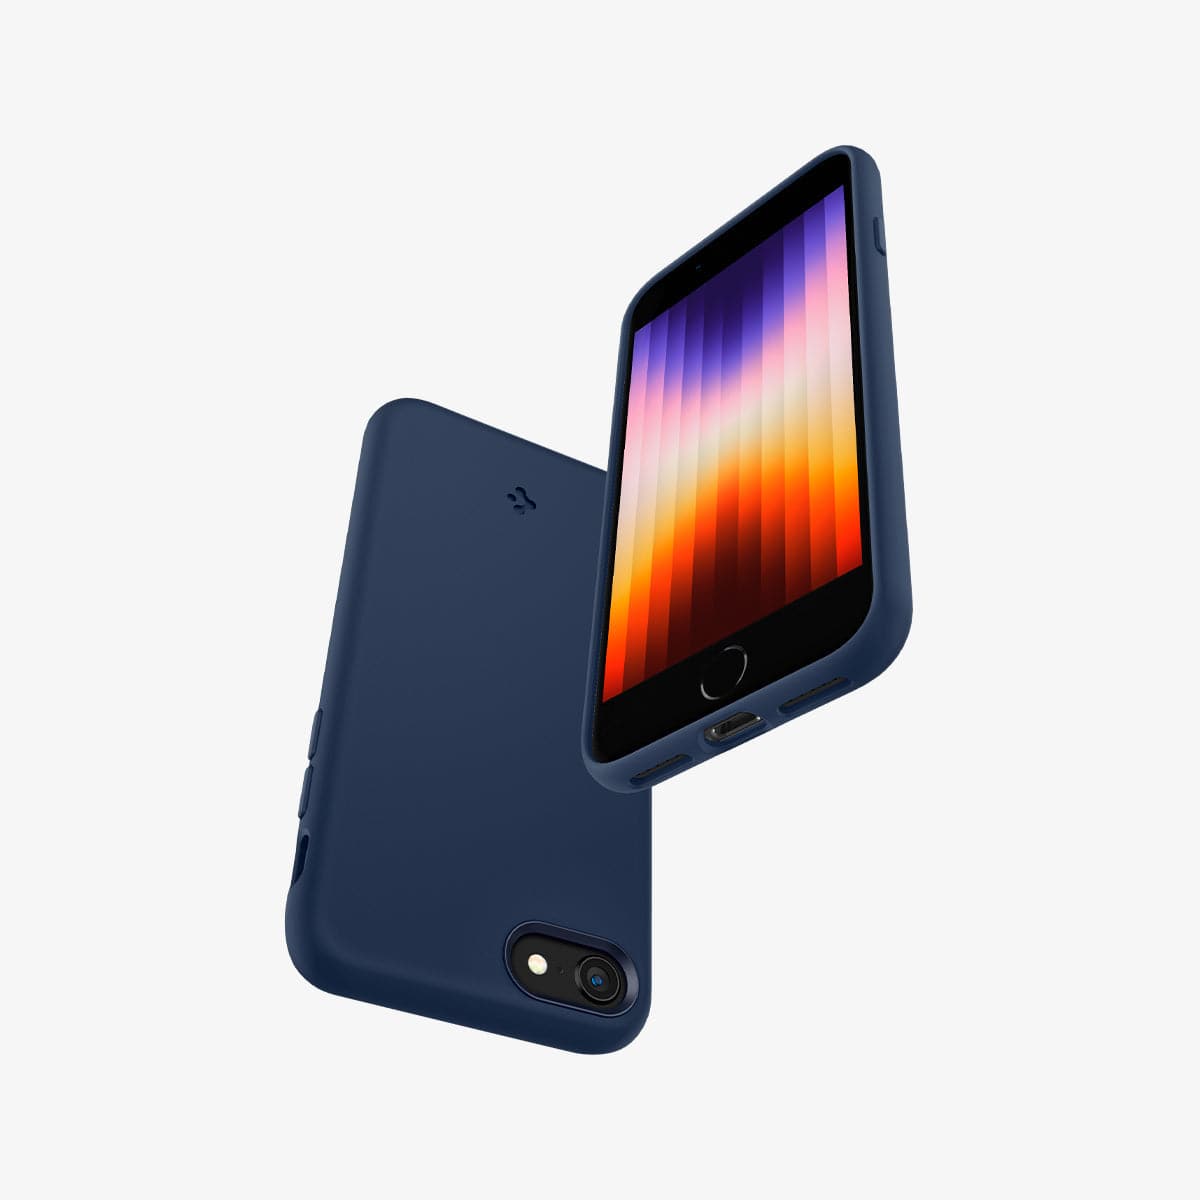 ACS04350 - iPhone 7 Series Silicone Fit Case in Navy Blue showing the front, back and partial sides